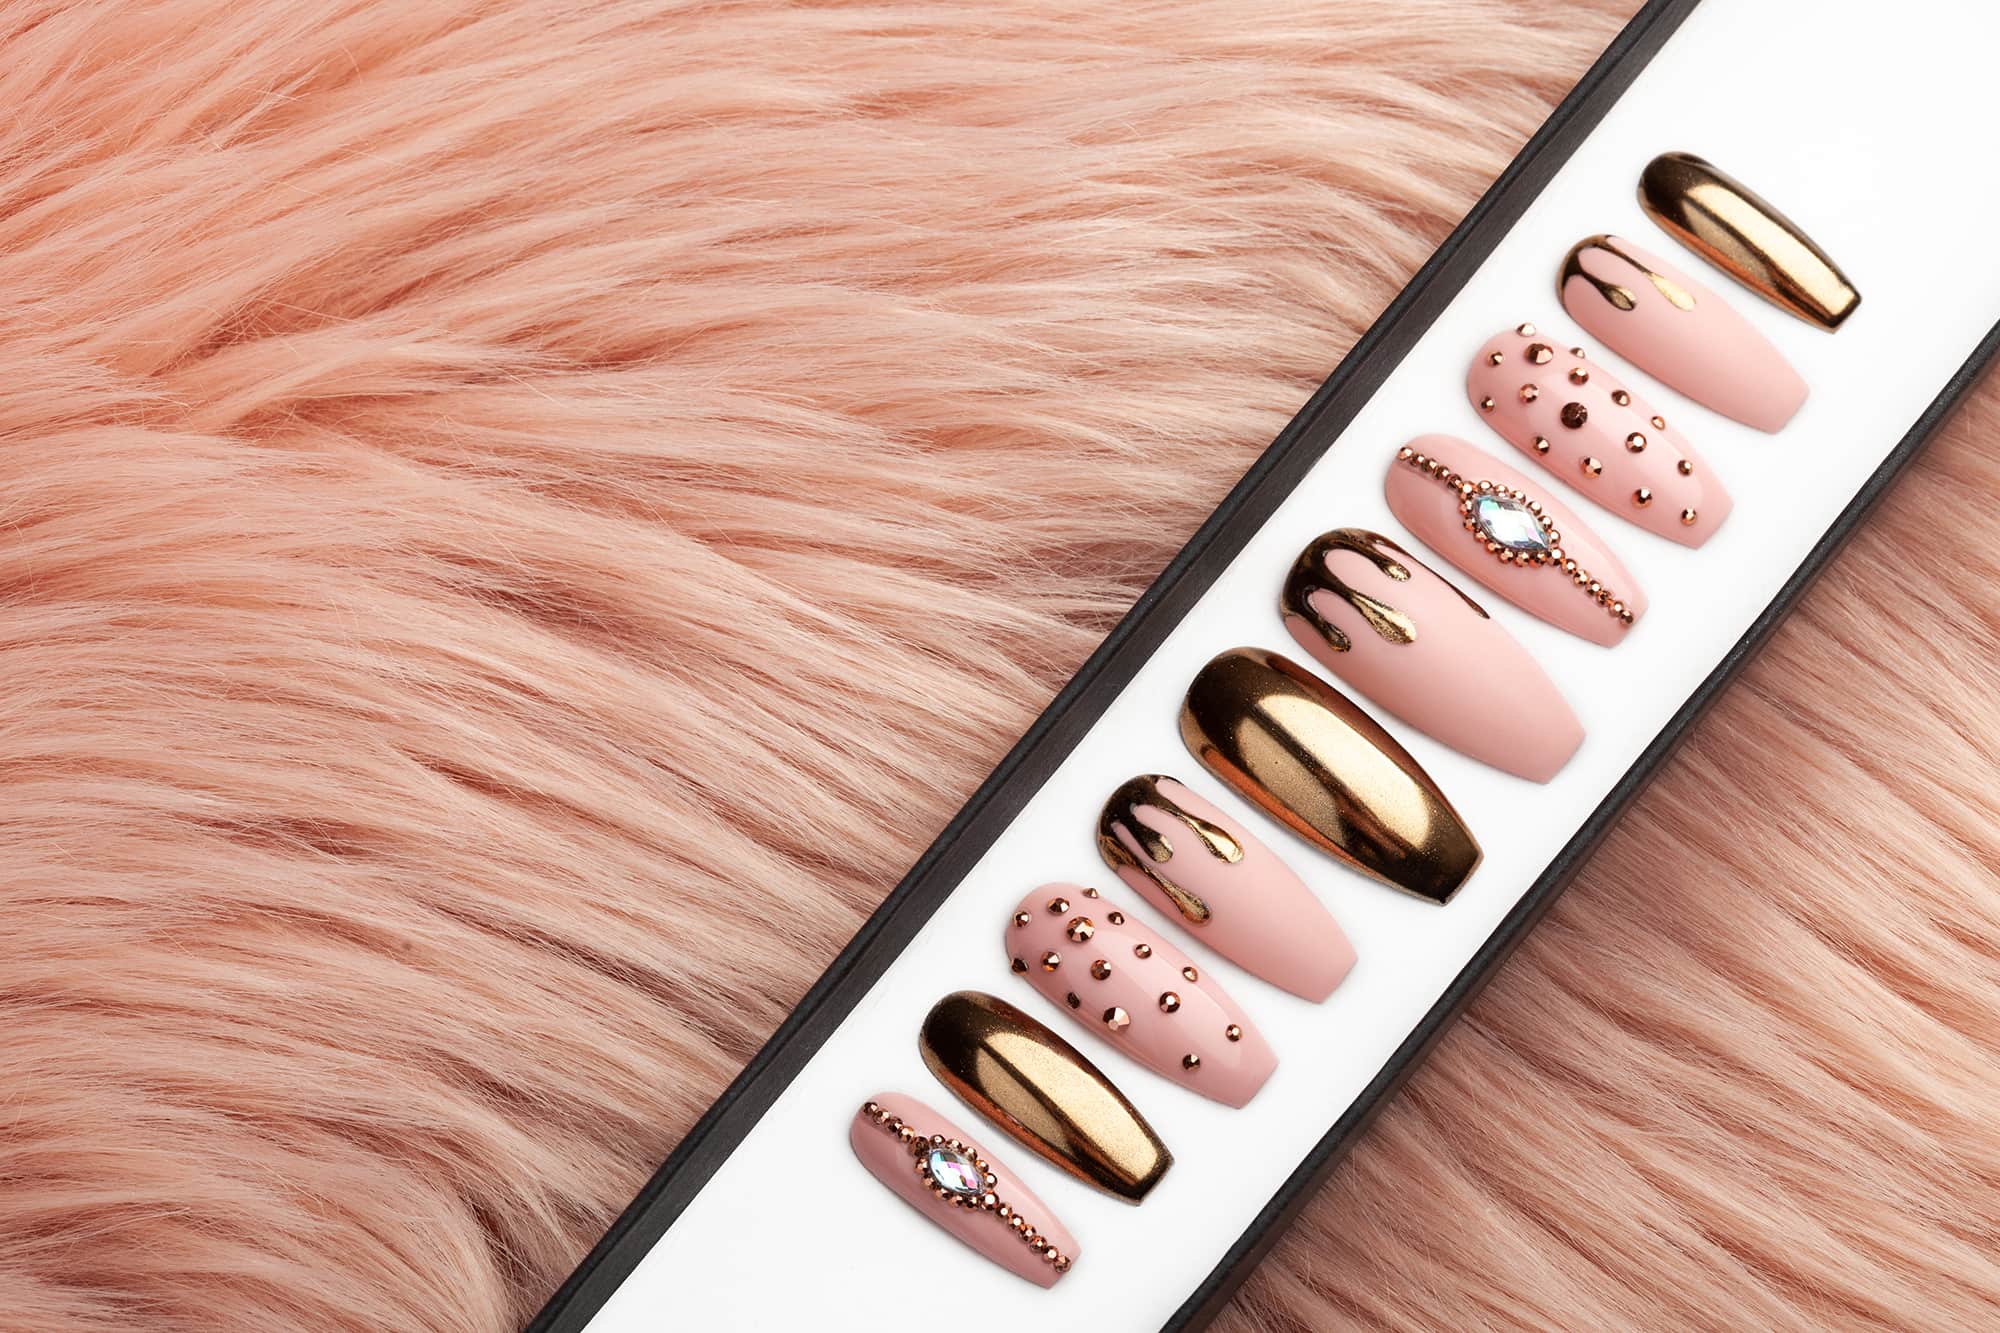 Rose Gold Drips Press On Nails With Rhinestones And Chrome - Lilium Nails